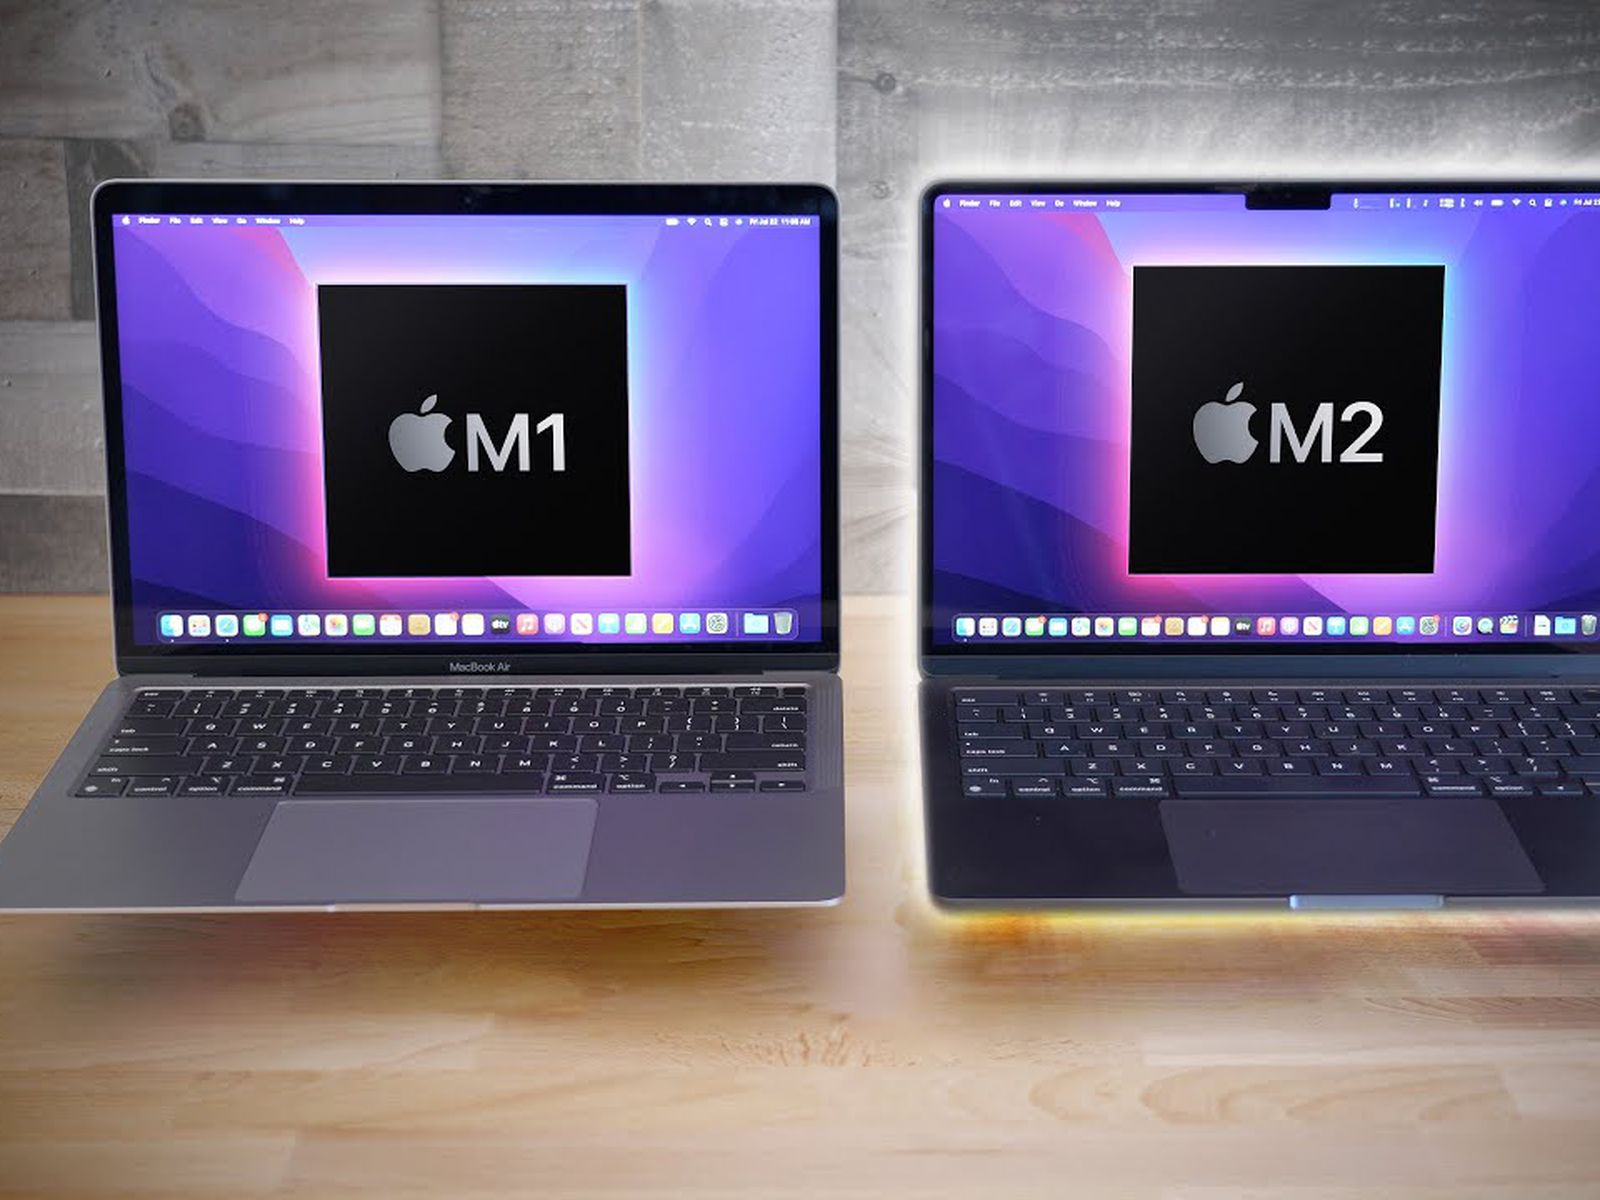 Macbook Air: M1 MacBook Air vs M2 MacBook Air: Which one should